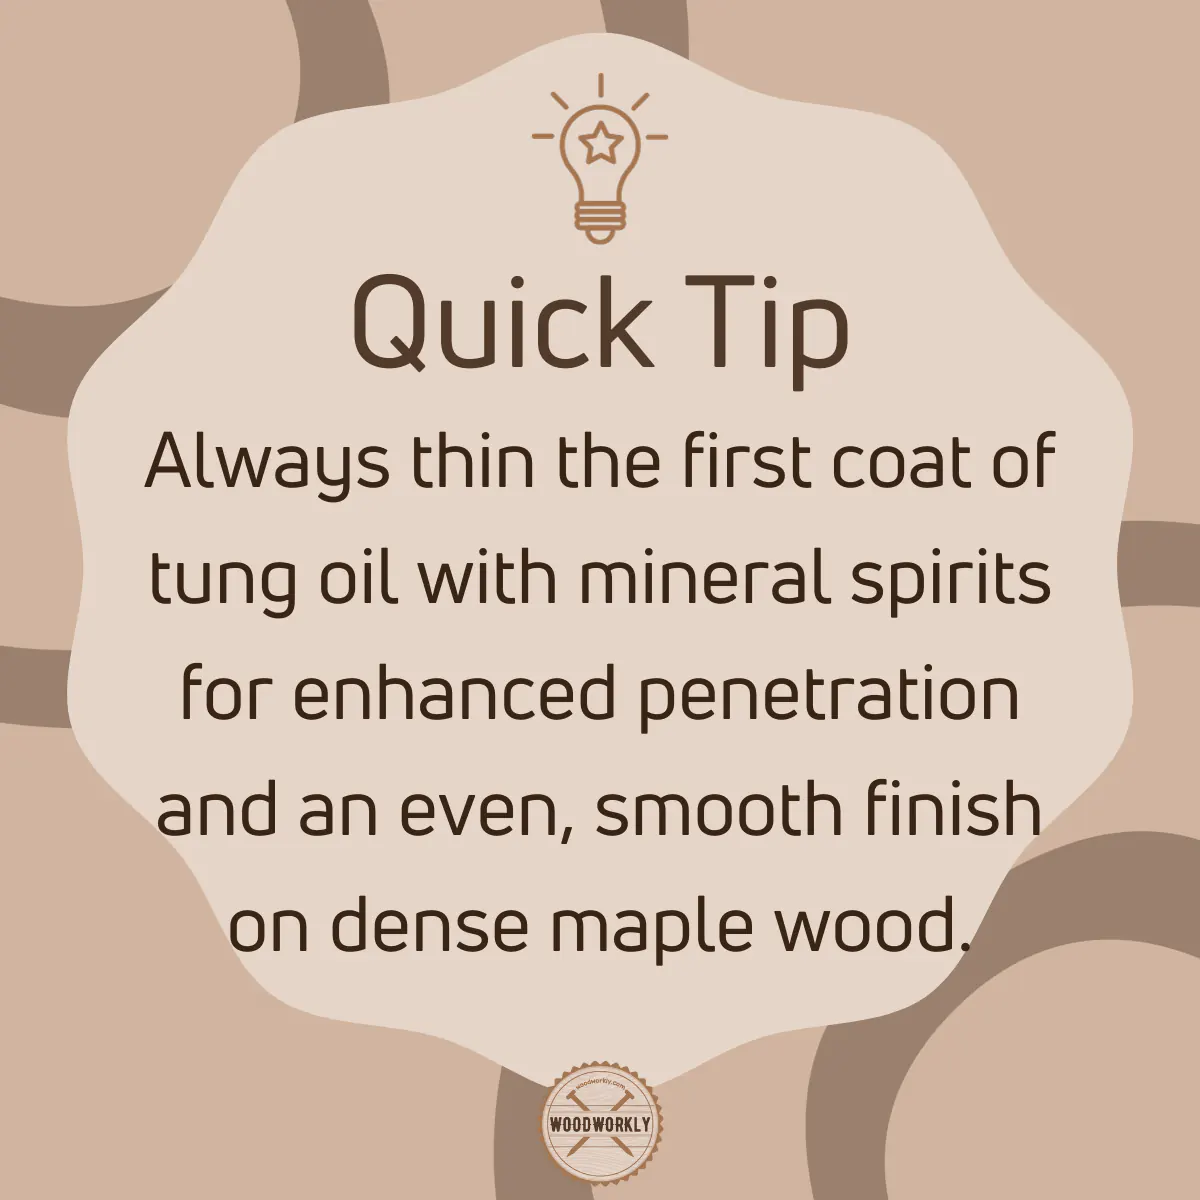 Tip for using Tung oil on maple